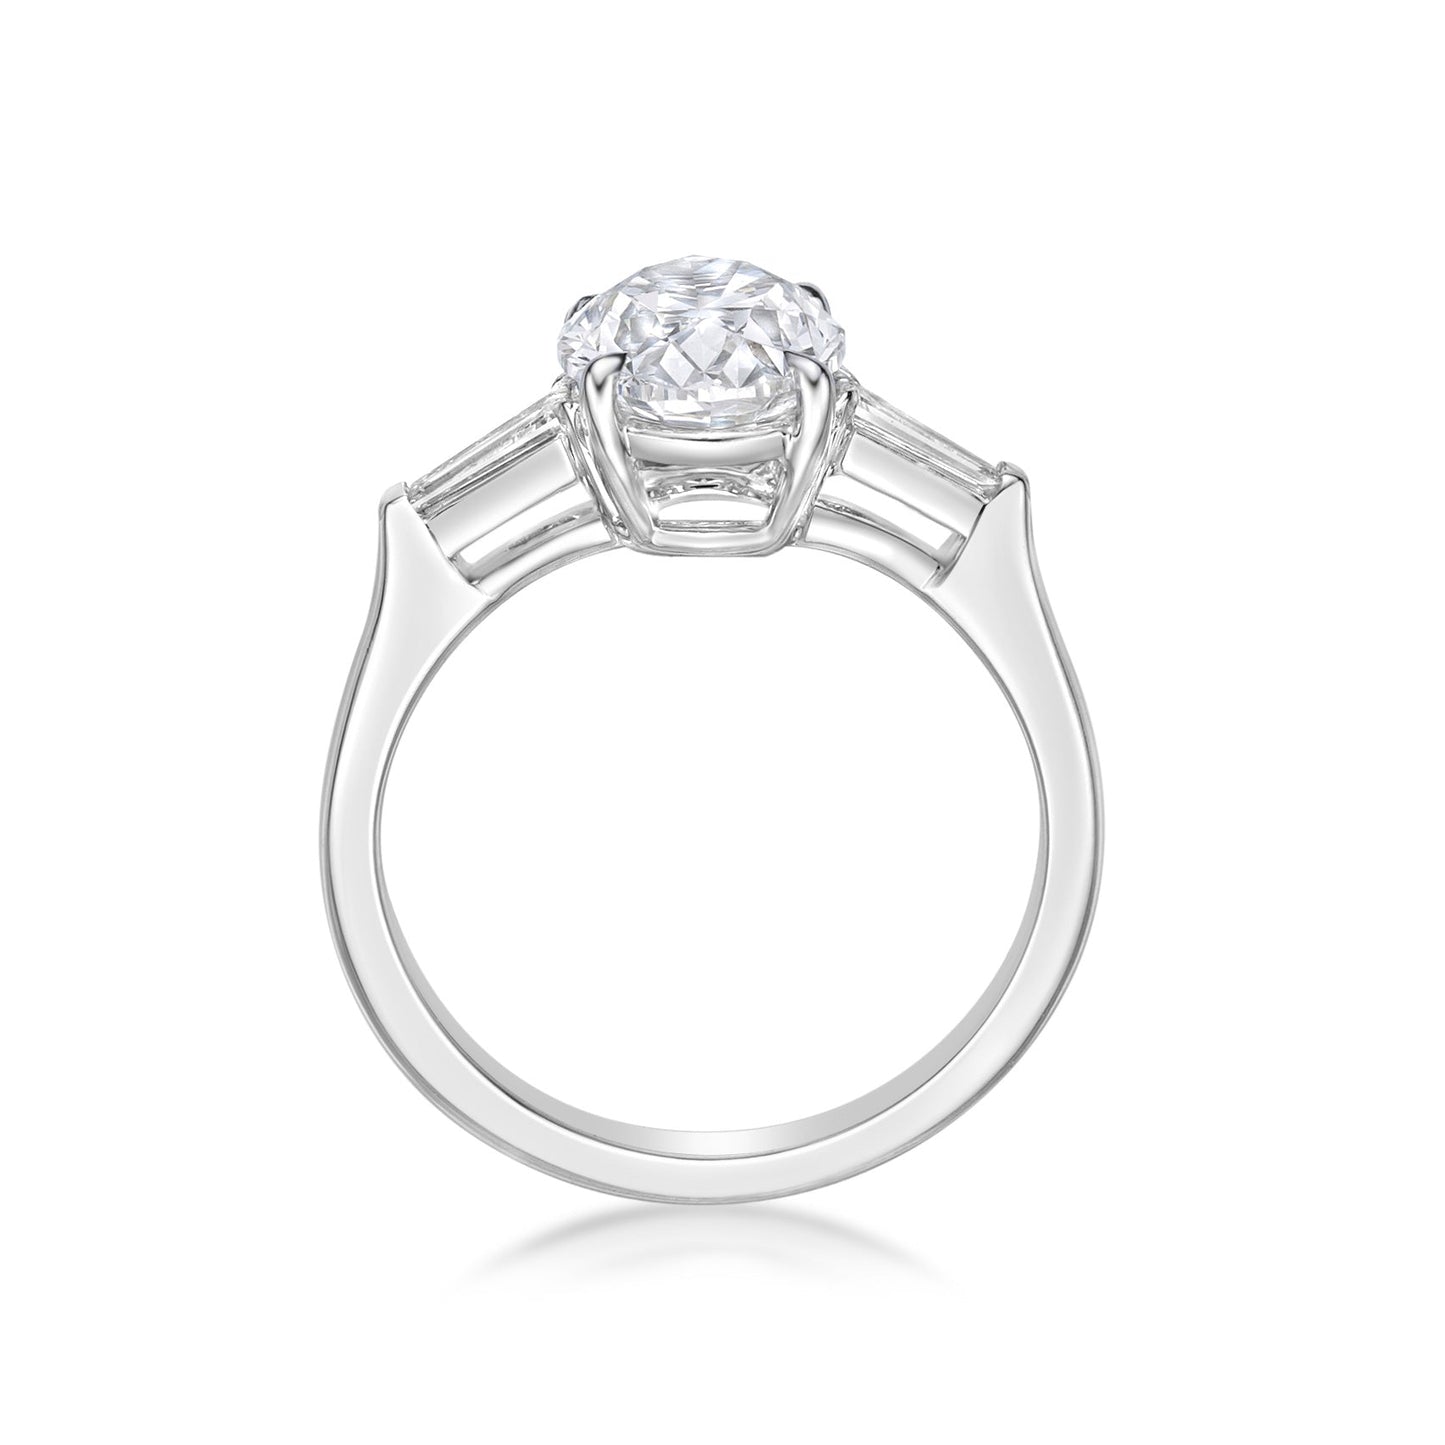 2.01ct Oval Brilliant diamond in a handmade 18K White Gold basket setting with 15pt Tapered baguette diamond sidestones